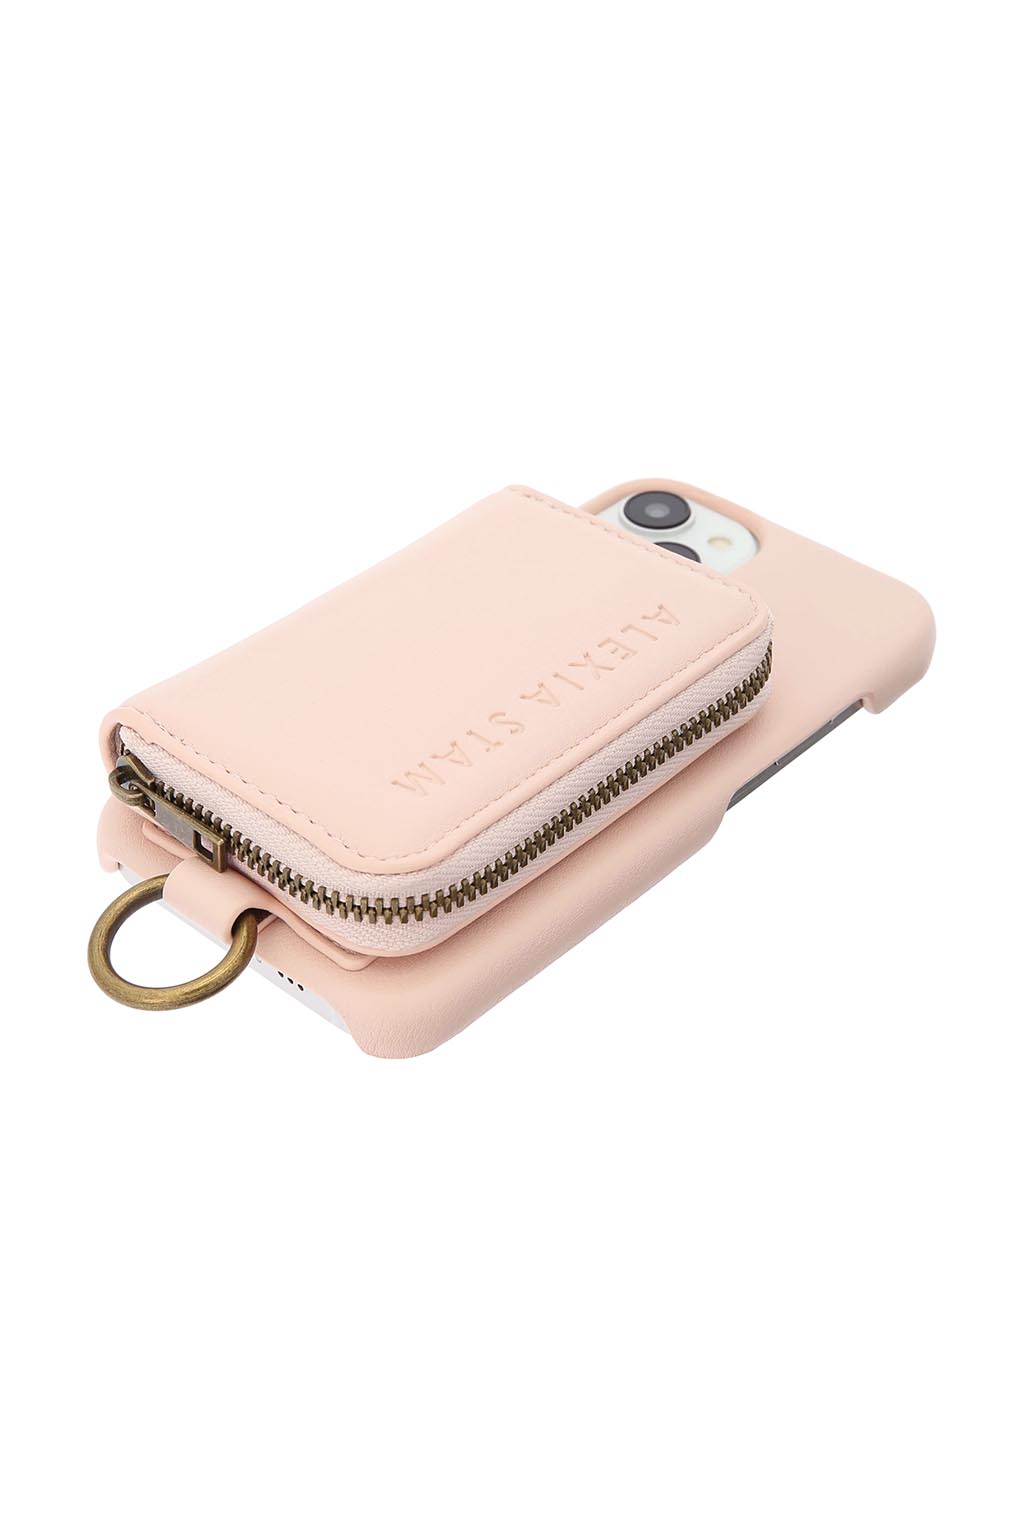 Eco Leather iPhone Case With Shoulder Strap - ALEXIA STAM